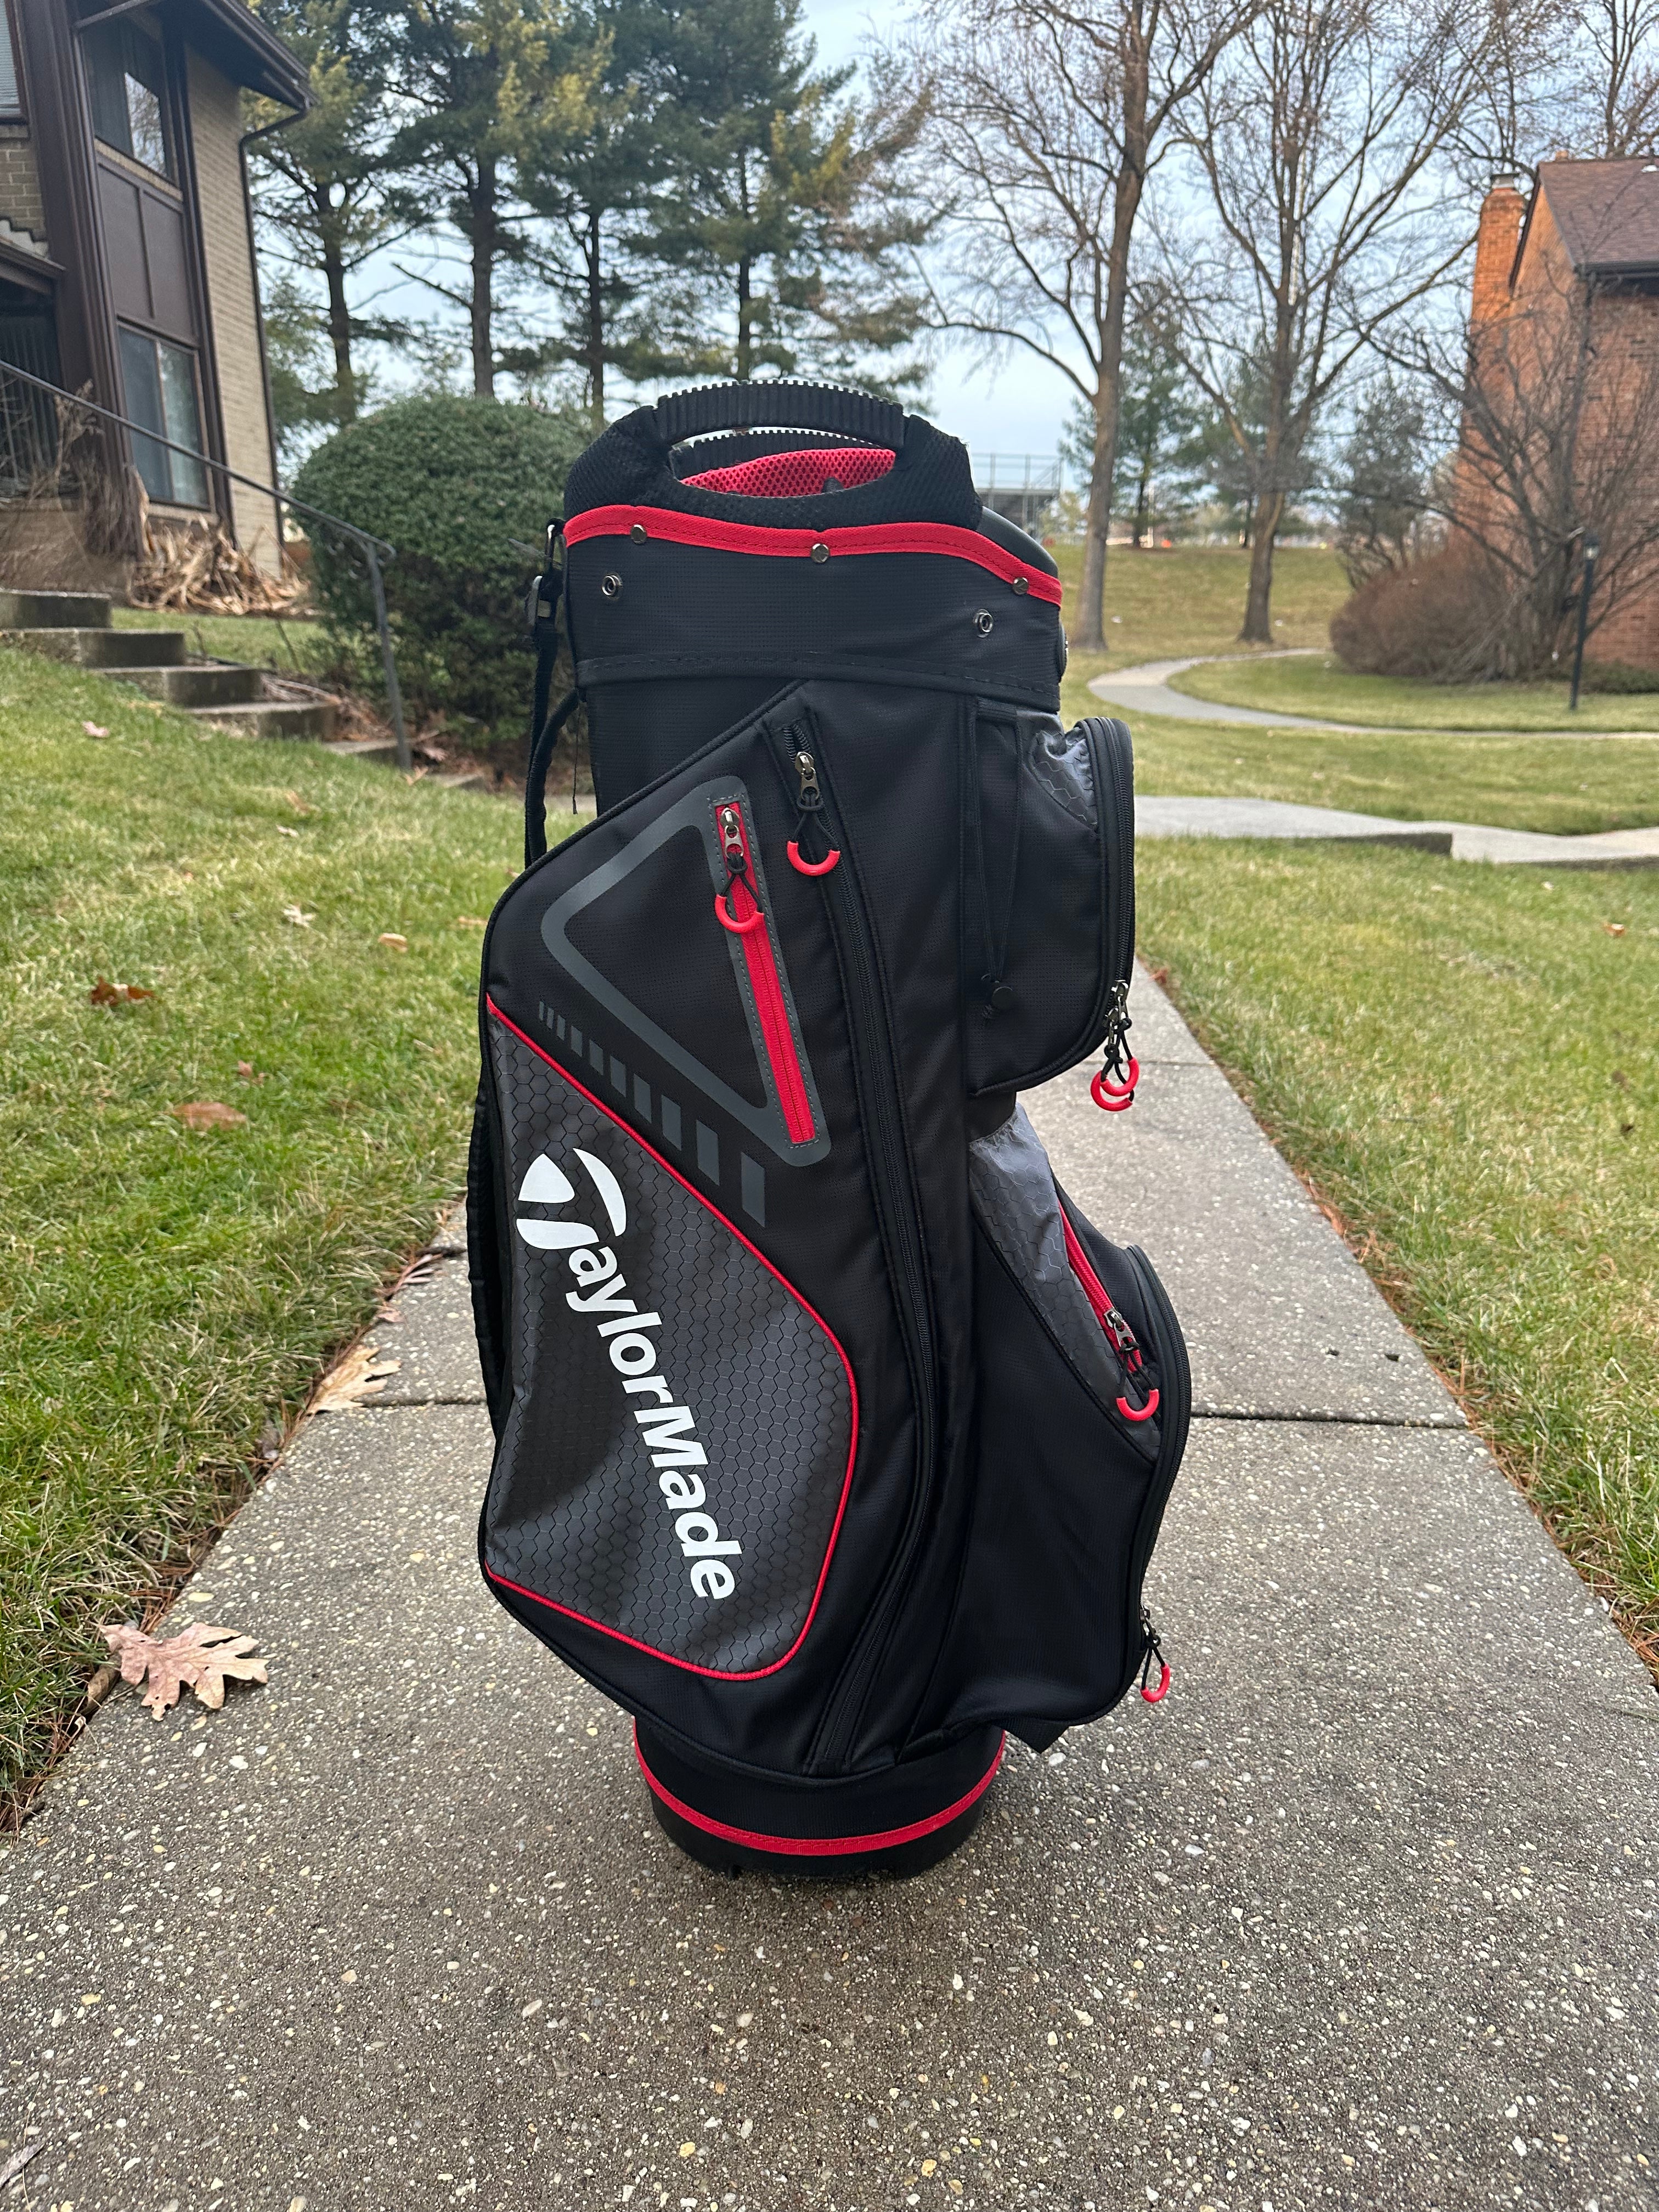 Discounted TaylorMade Select Plus Cart Bag Golf Bag For Sale